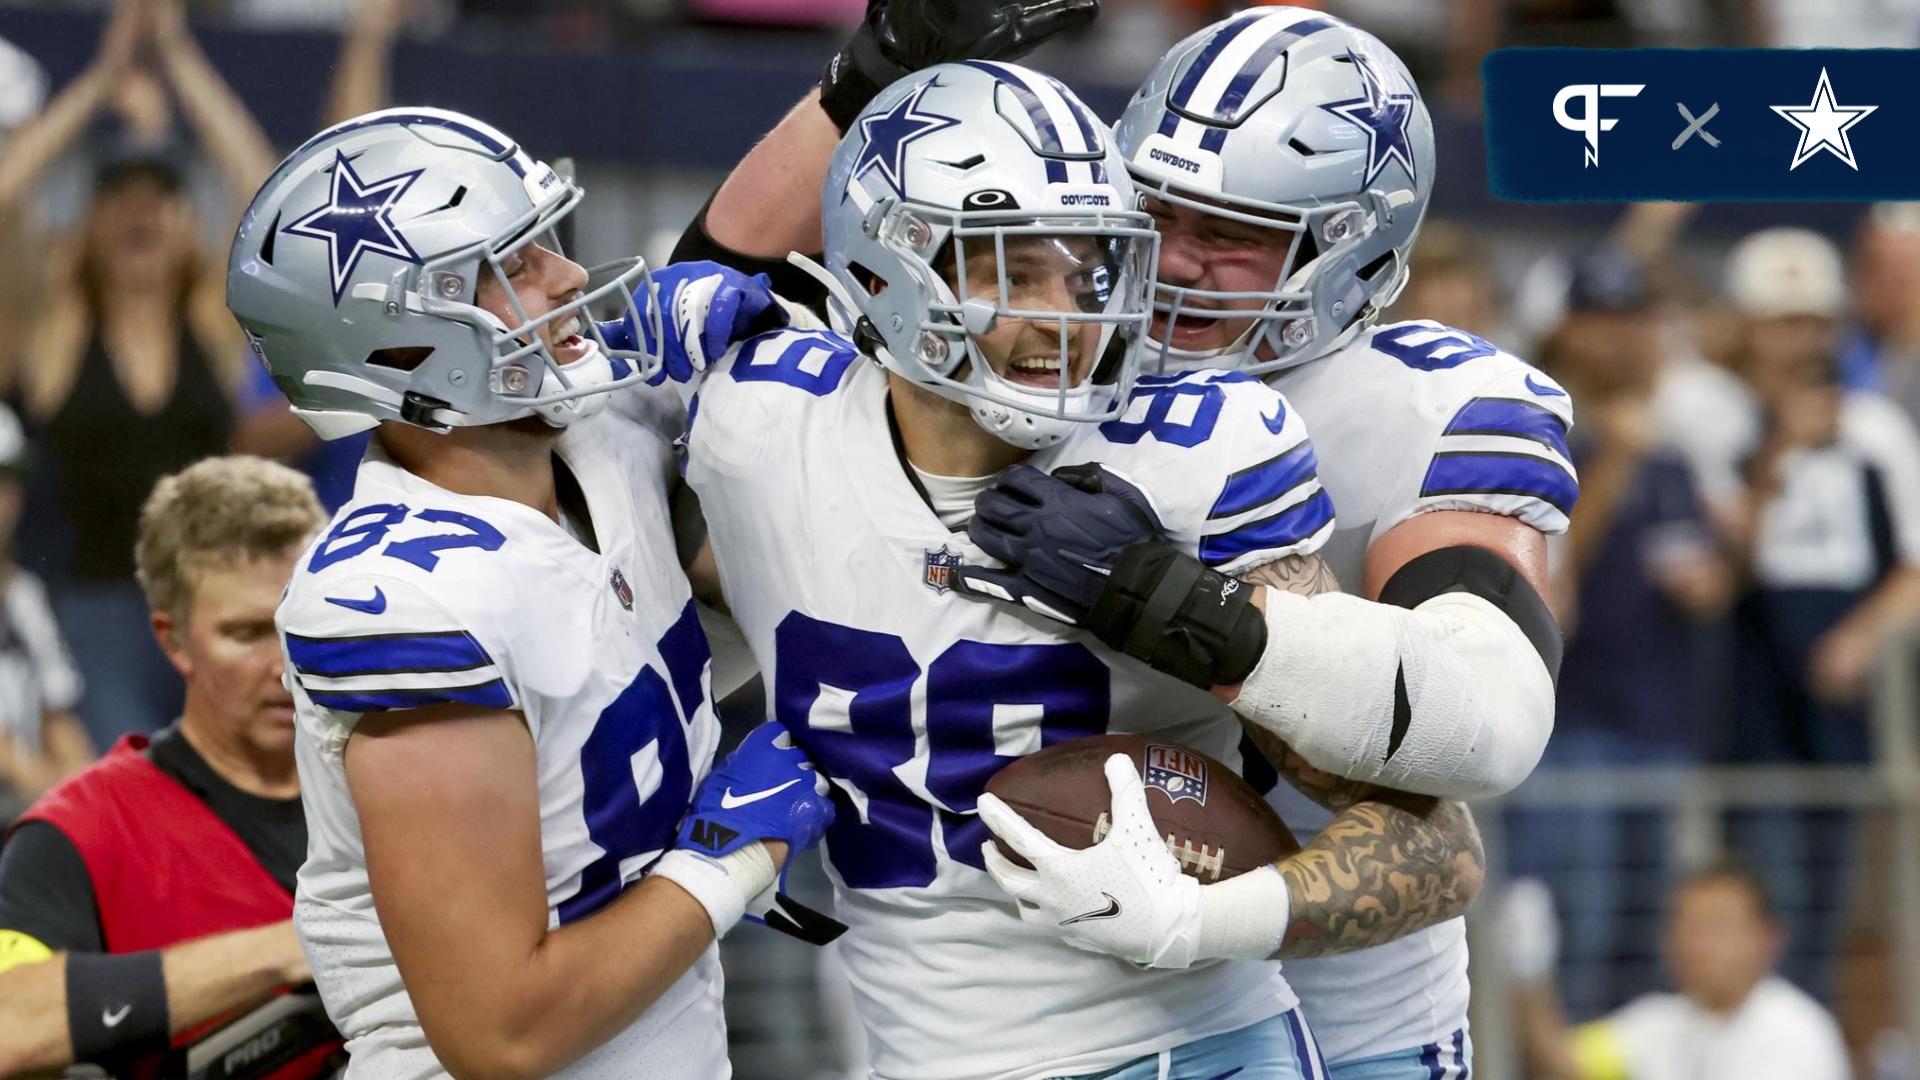 Dallas Cowboys tight end Peyton Hendershot (89) celebrates with teammates after catching a touchdown pass during the fourth quarter against the Detroit Lions at AT&T Stadium.